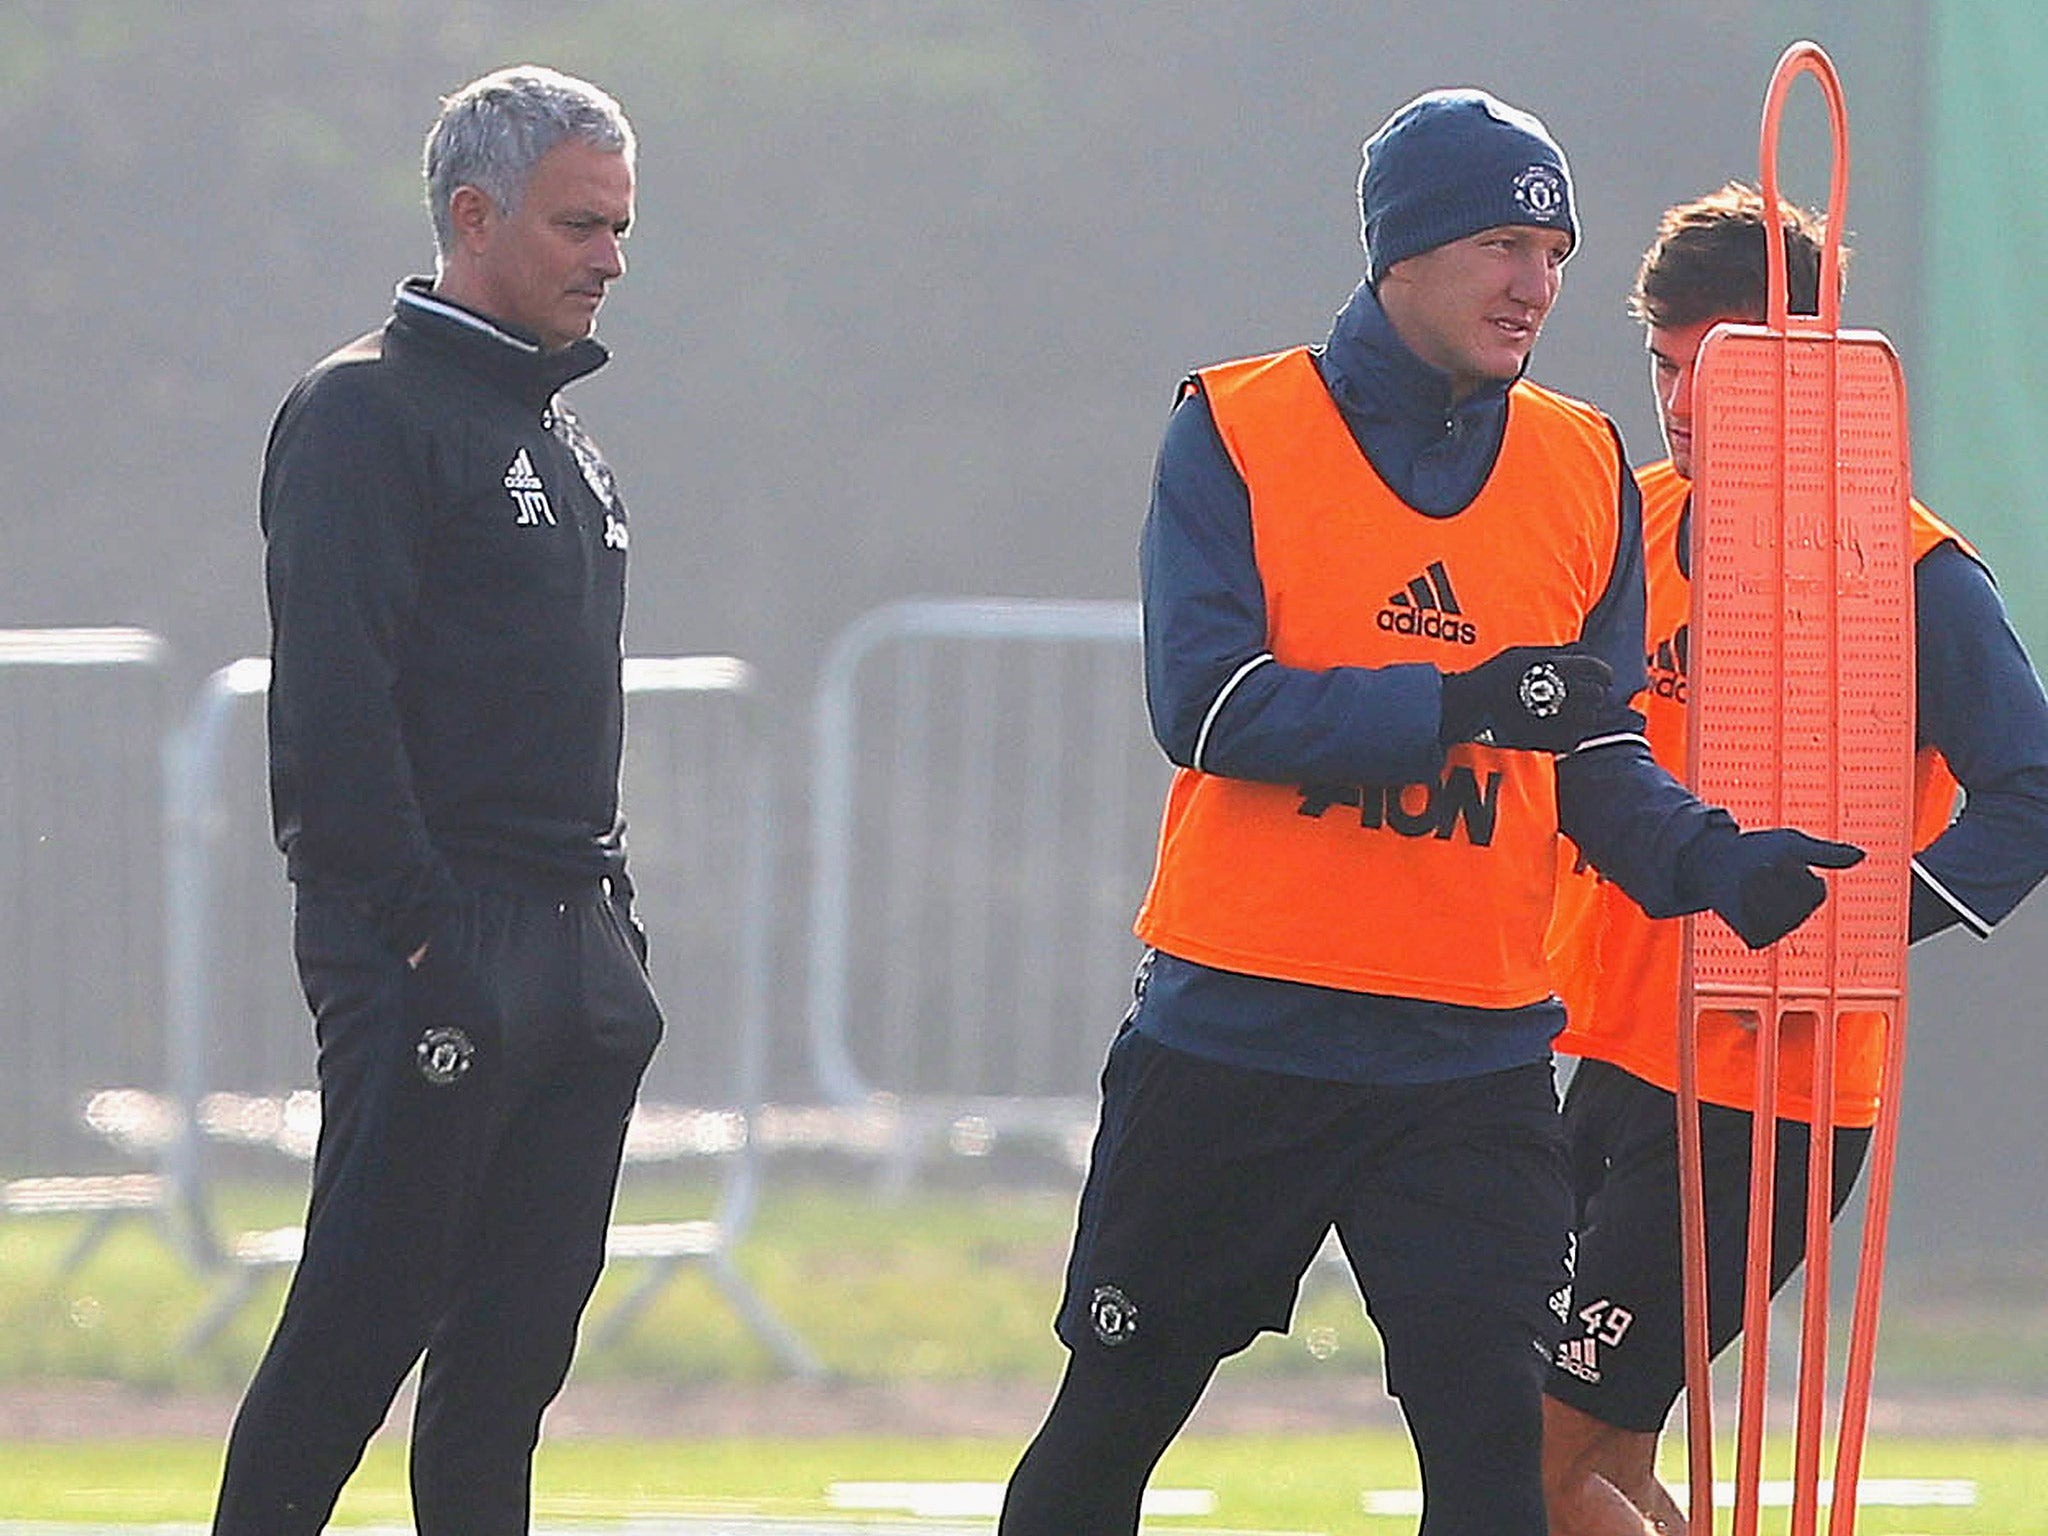 Jose Mourinho appeared to make a U-turn over his decision to banish Bastian Schweinsteiger from United training